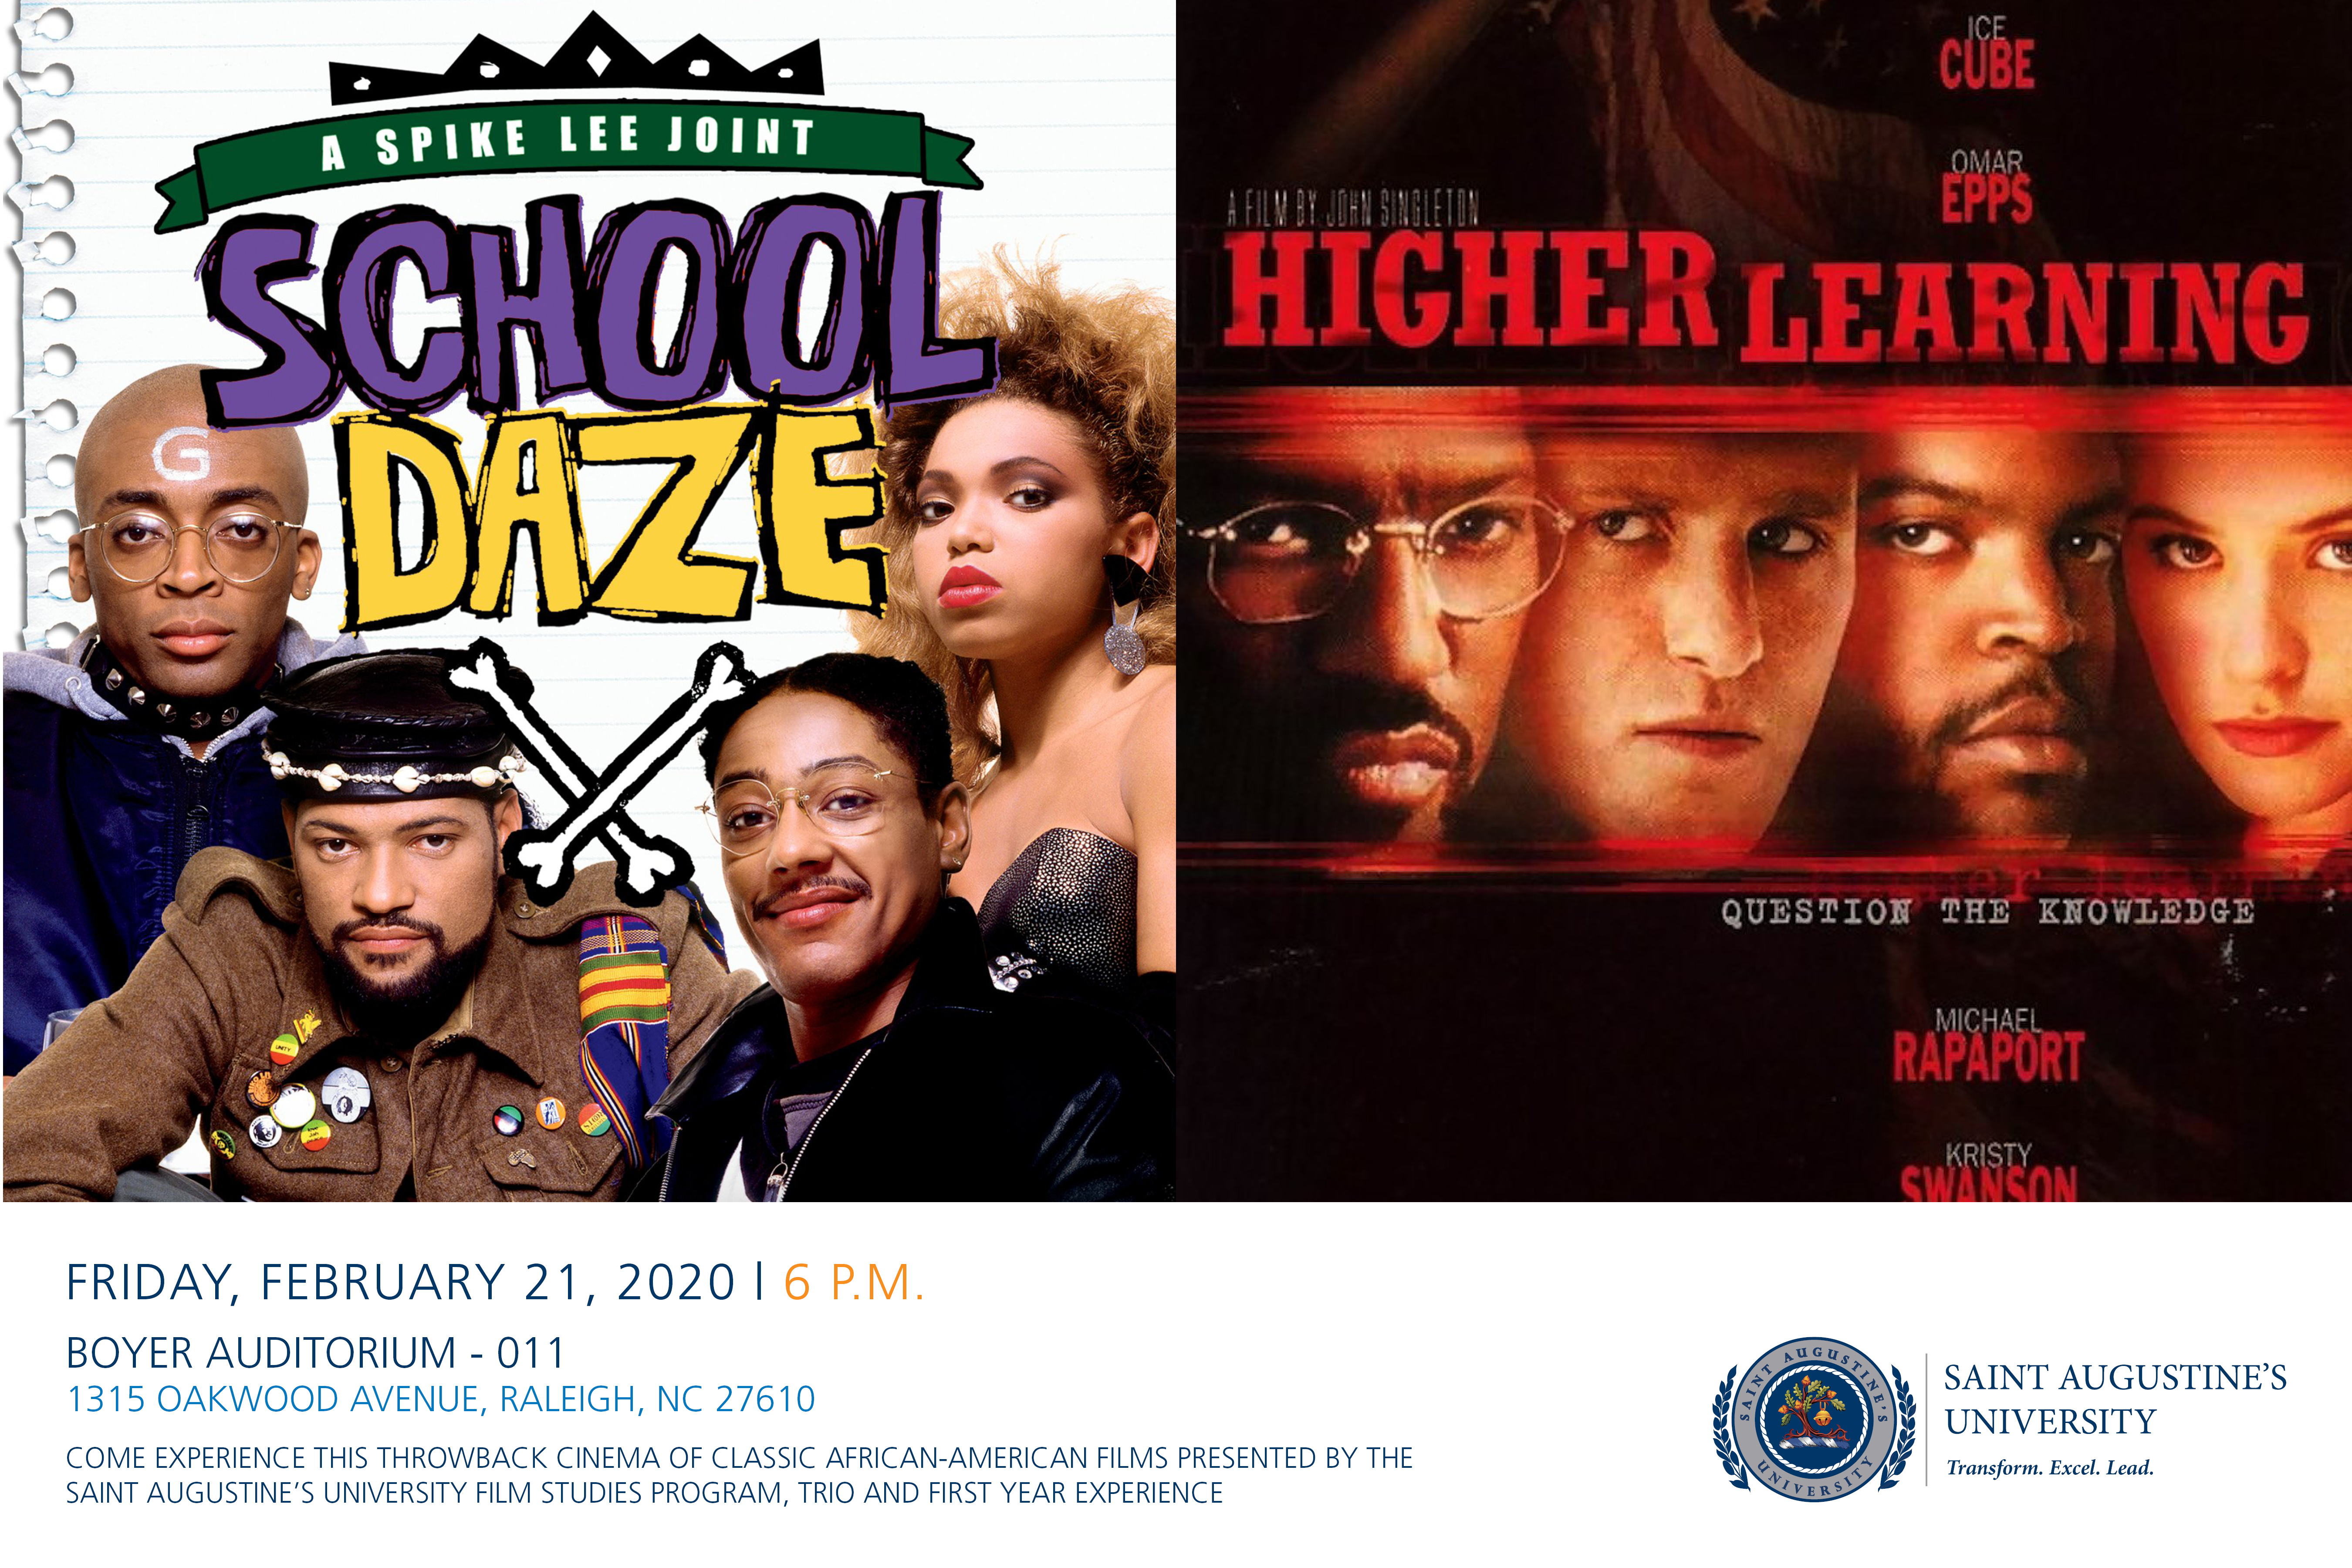 Throwback Cinema of Classic African-American Film A Spike Lee Joint “School  Daze”and “Higher Learning” - Saint Augustine's University